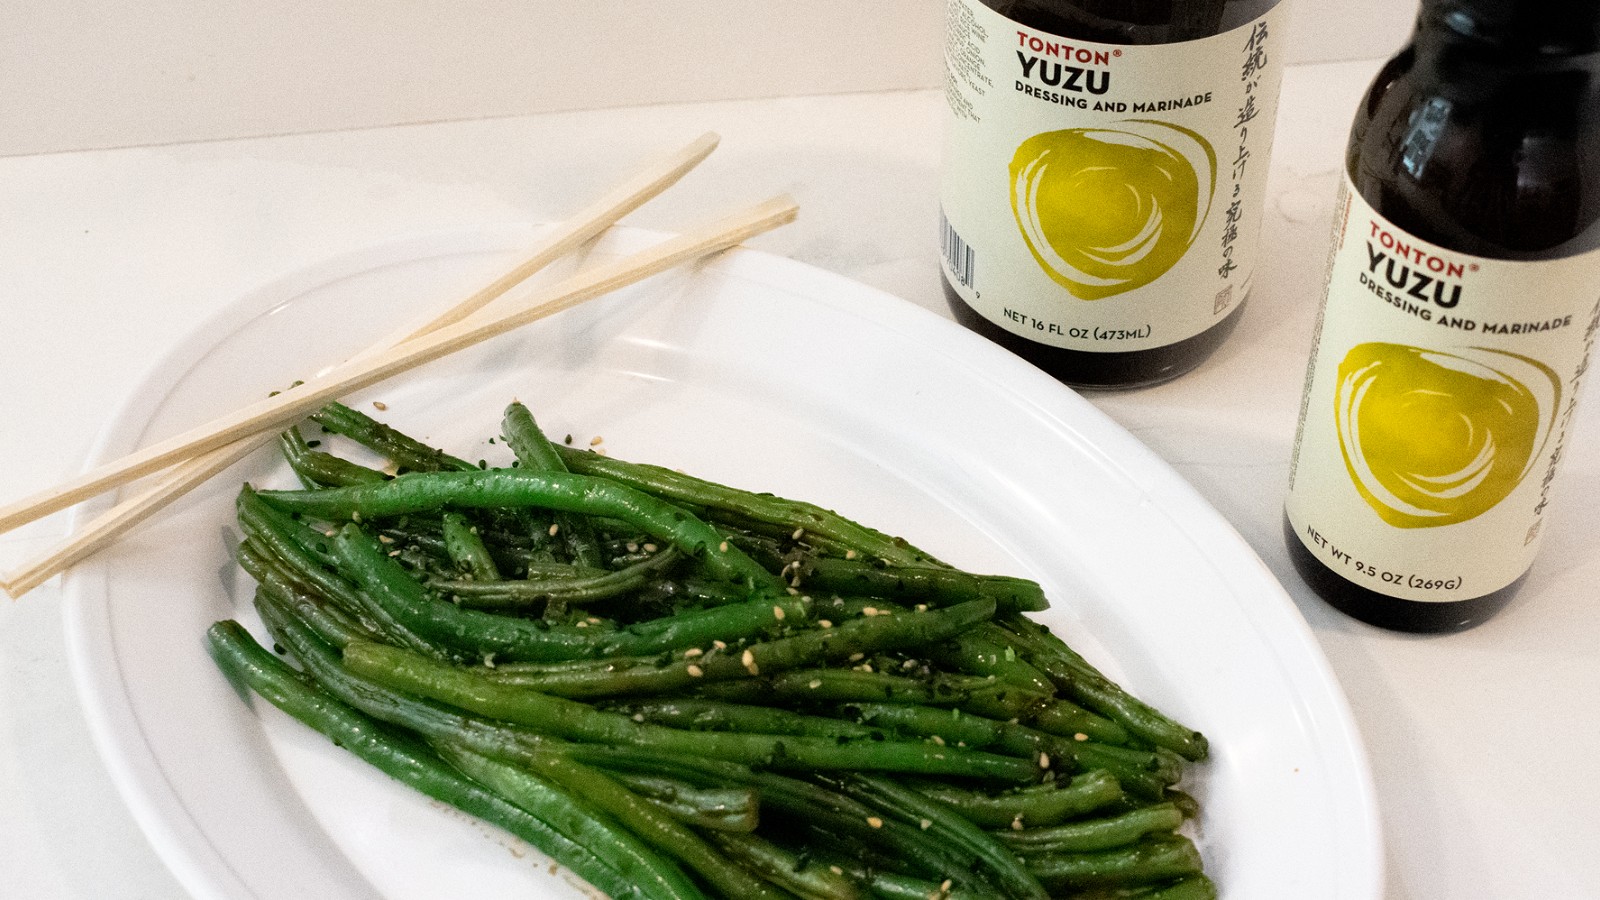 Image of Green Beans in Yuzu Sauce